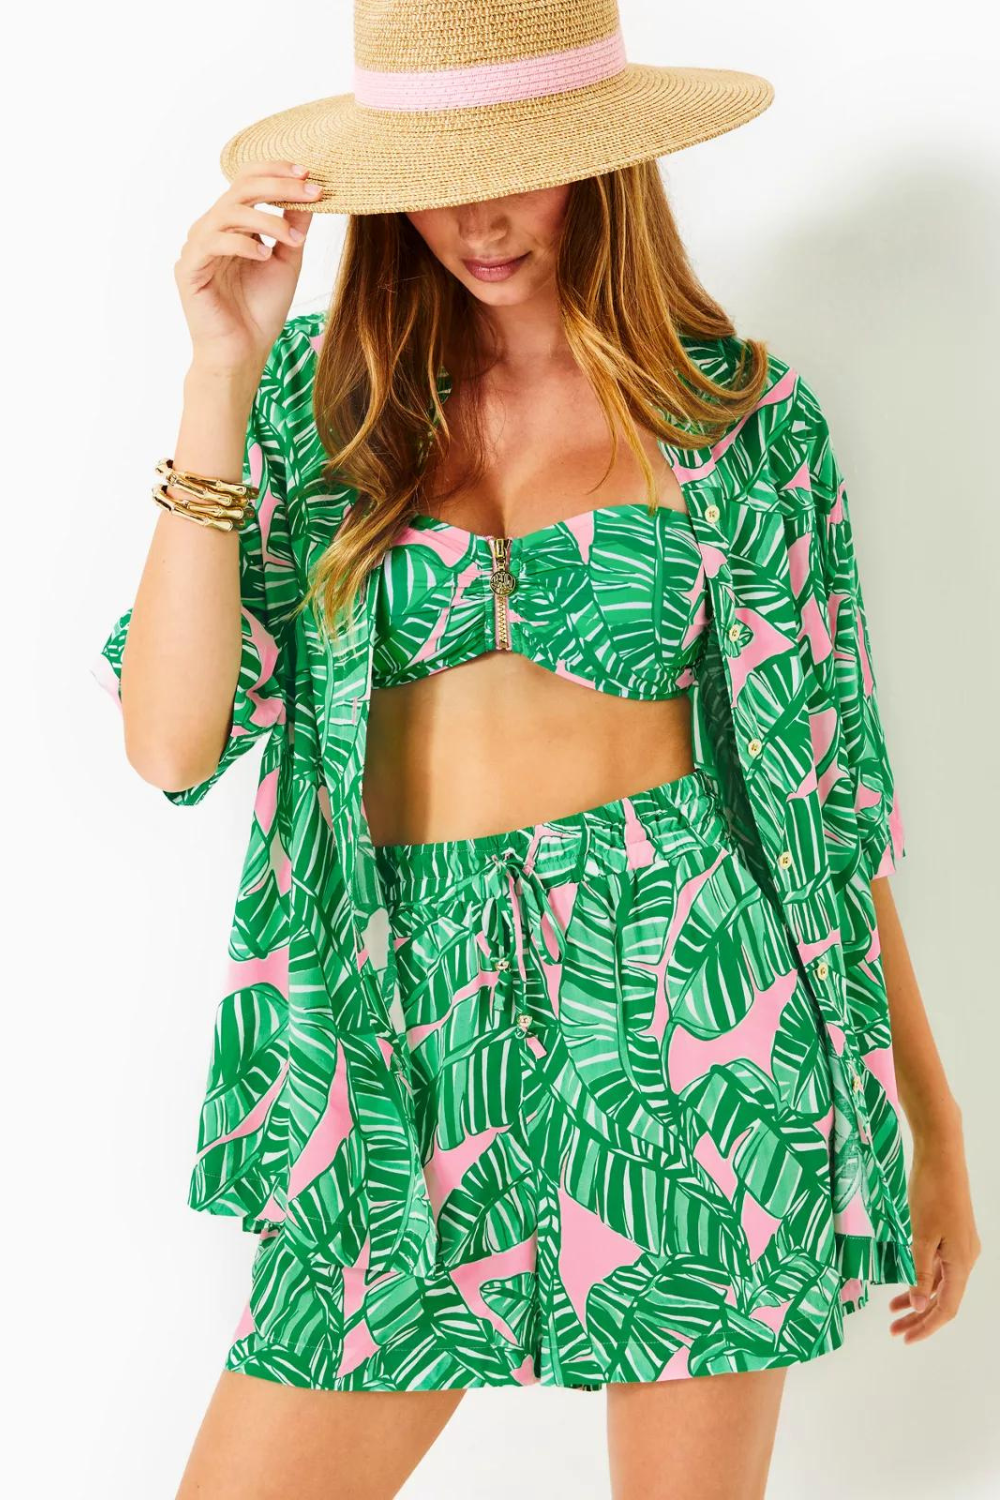 Lilly Pulitzer Riv Shorts Cover Up - Let's Go Bananas